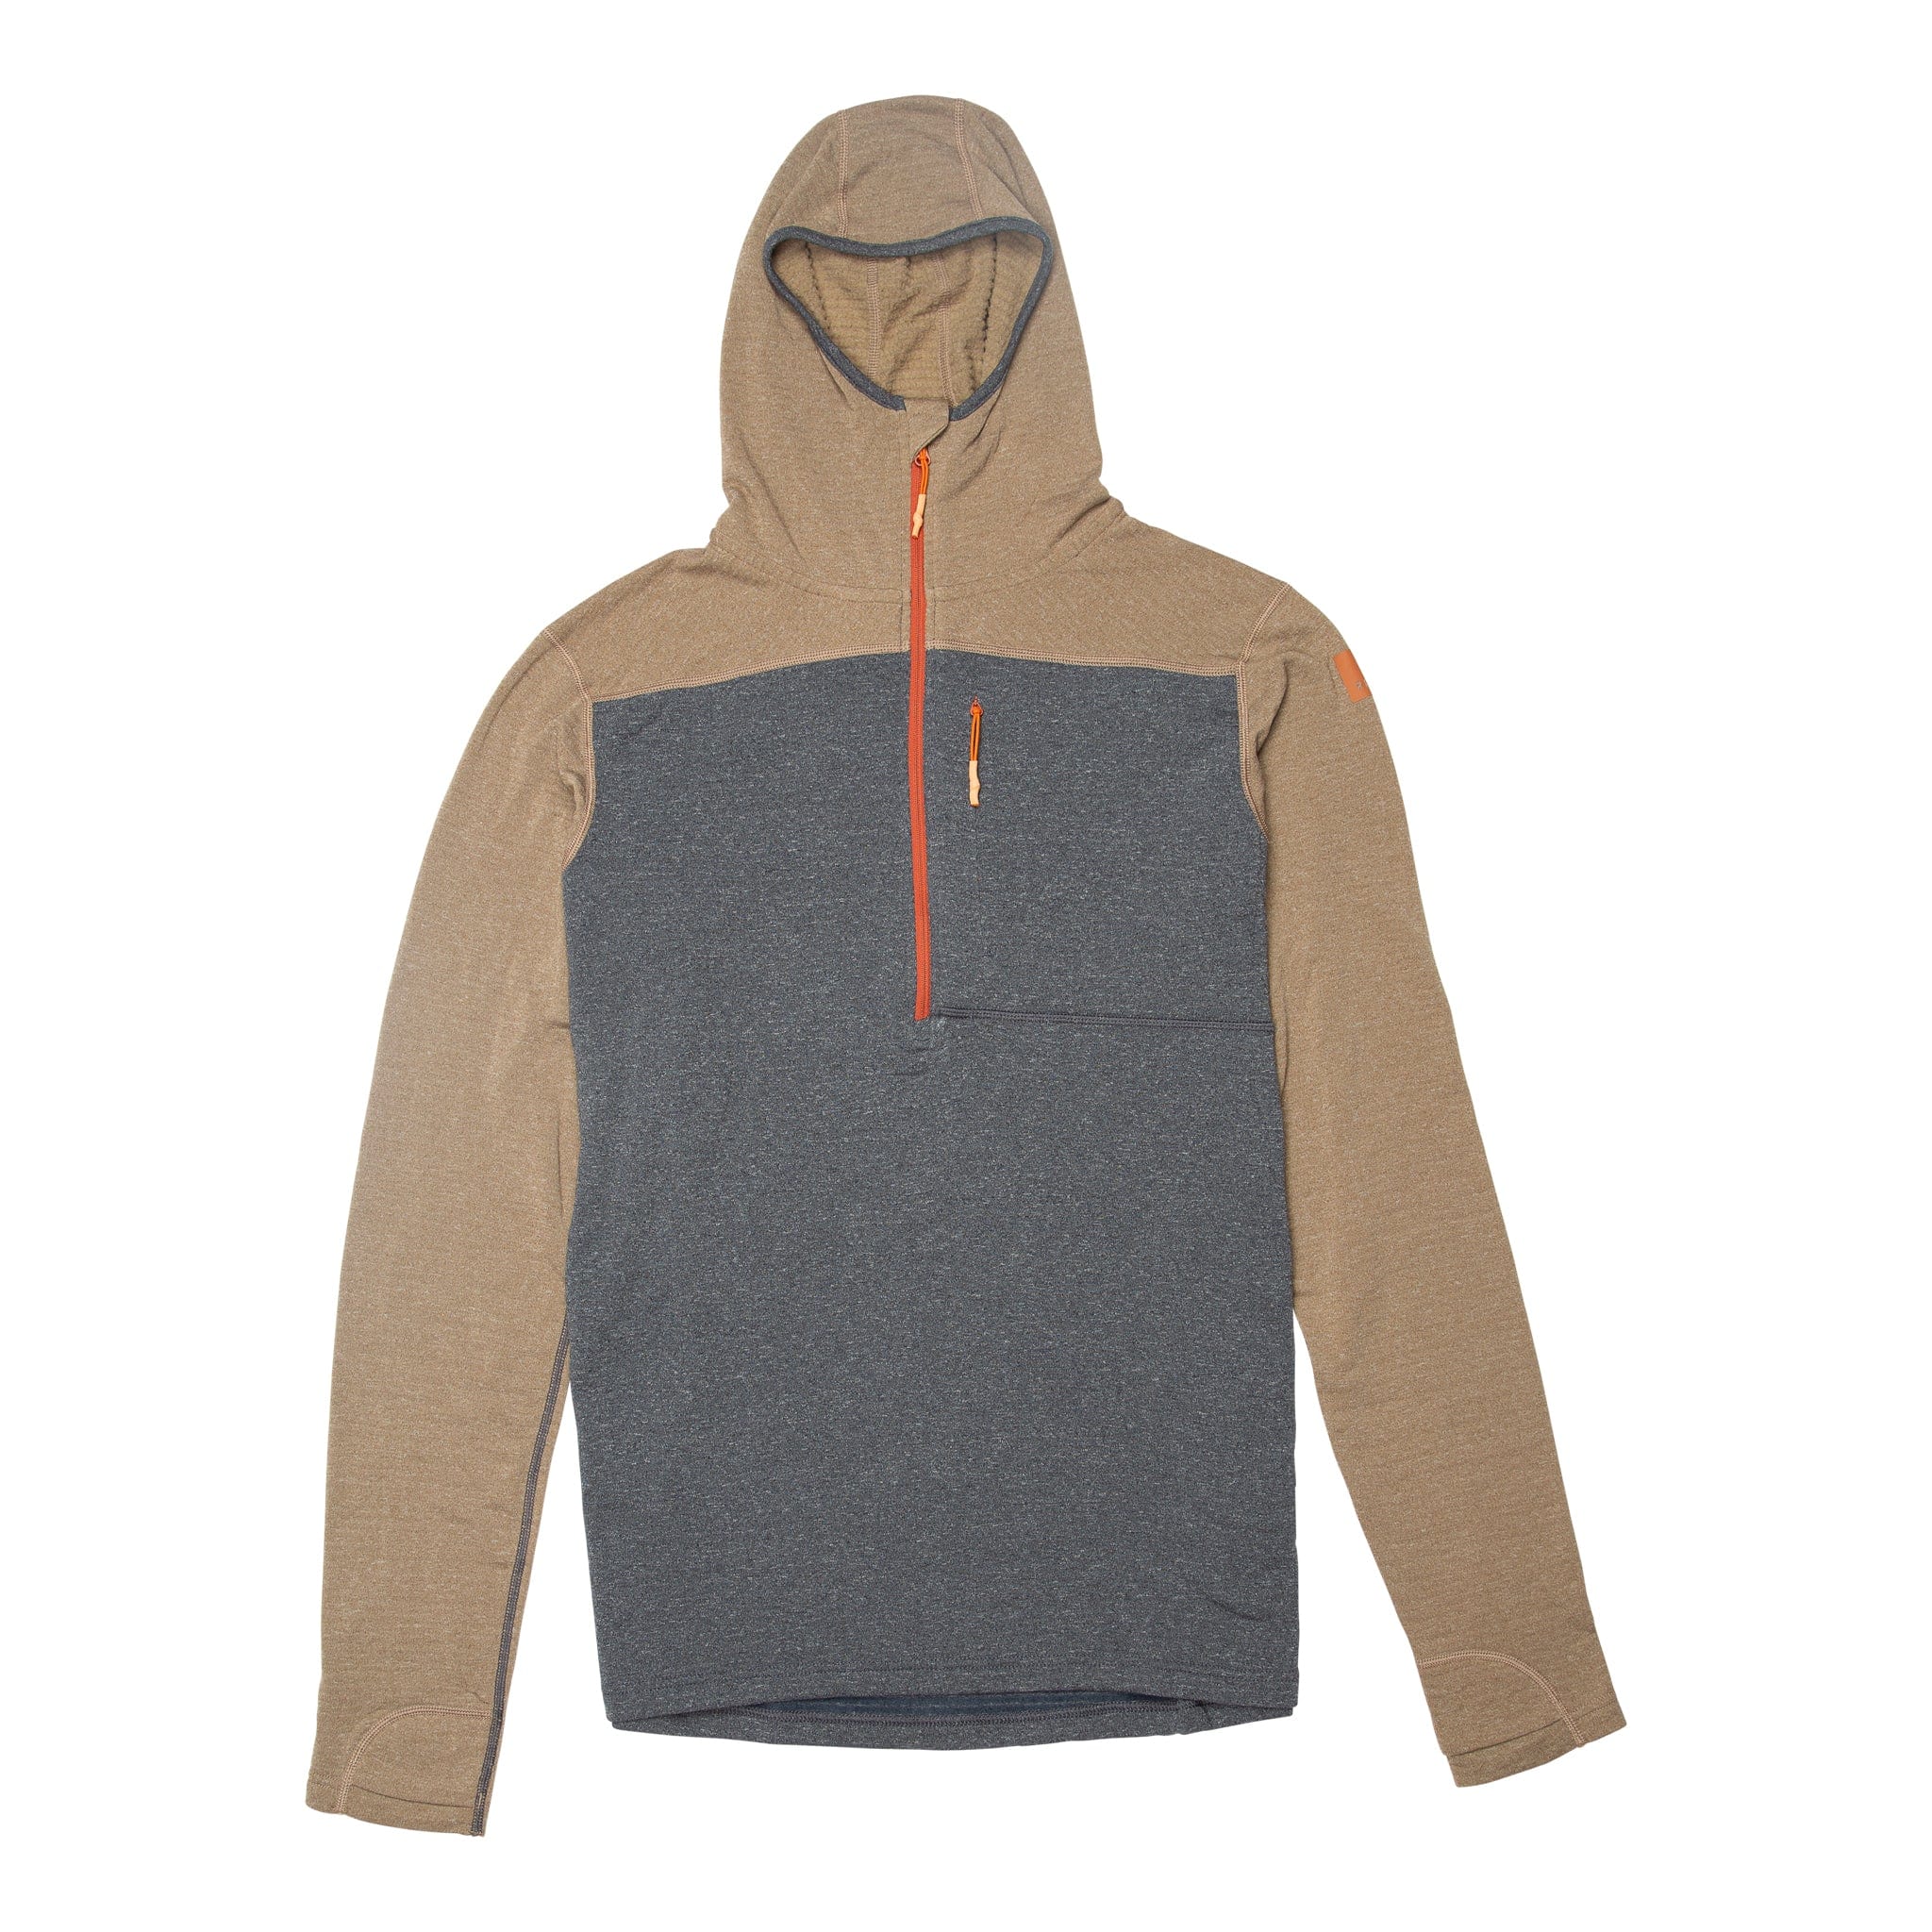 Merino Wool Gear - The #1 Site For All Your Merino Wool Needs